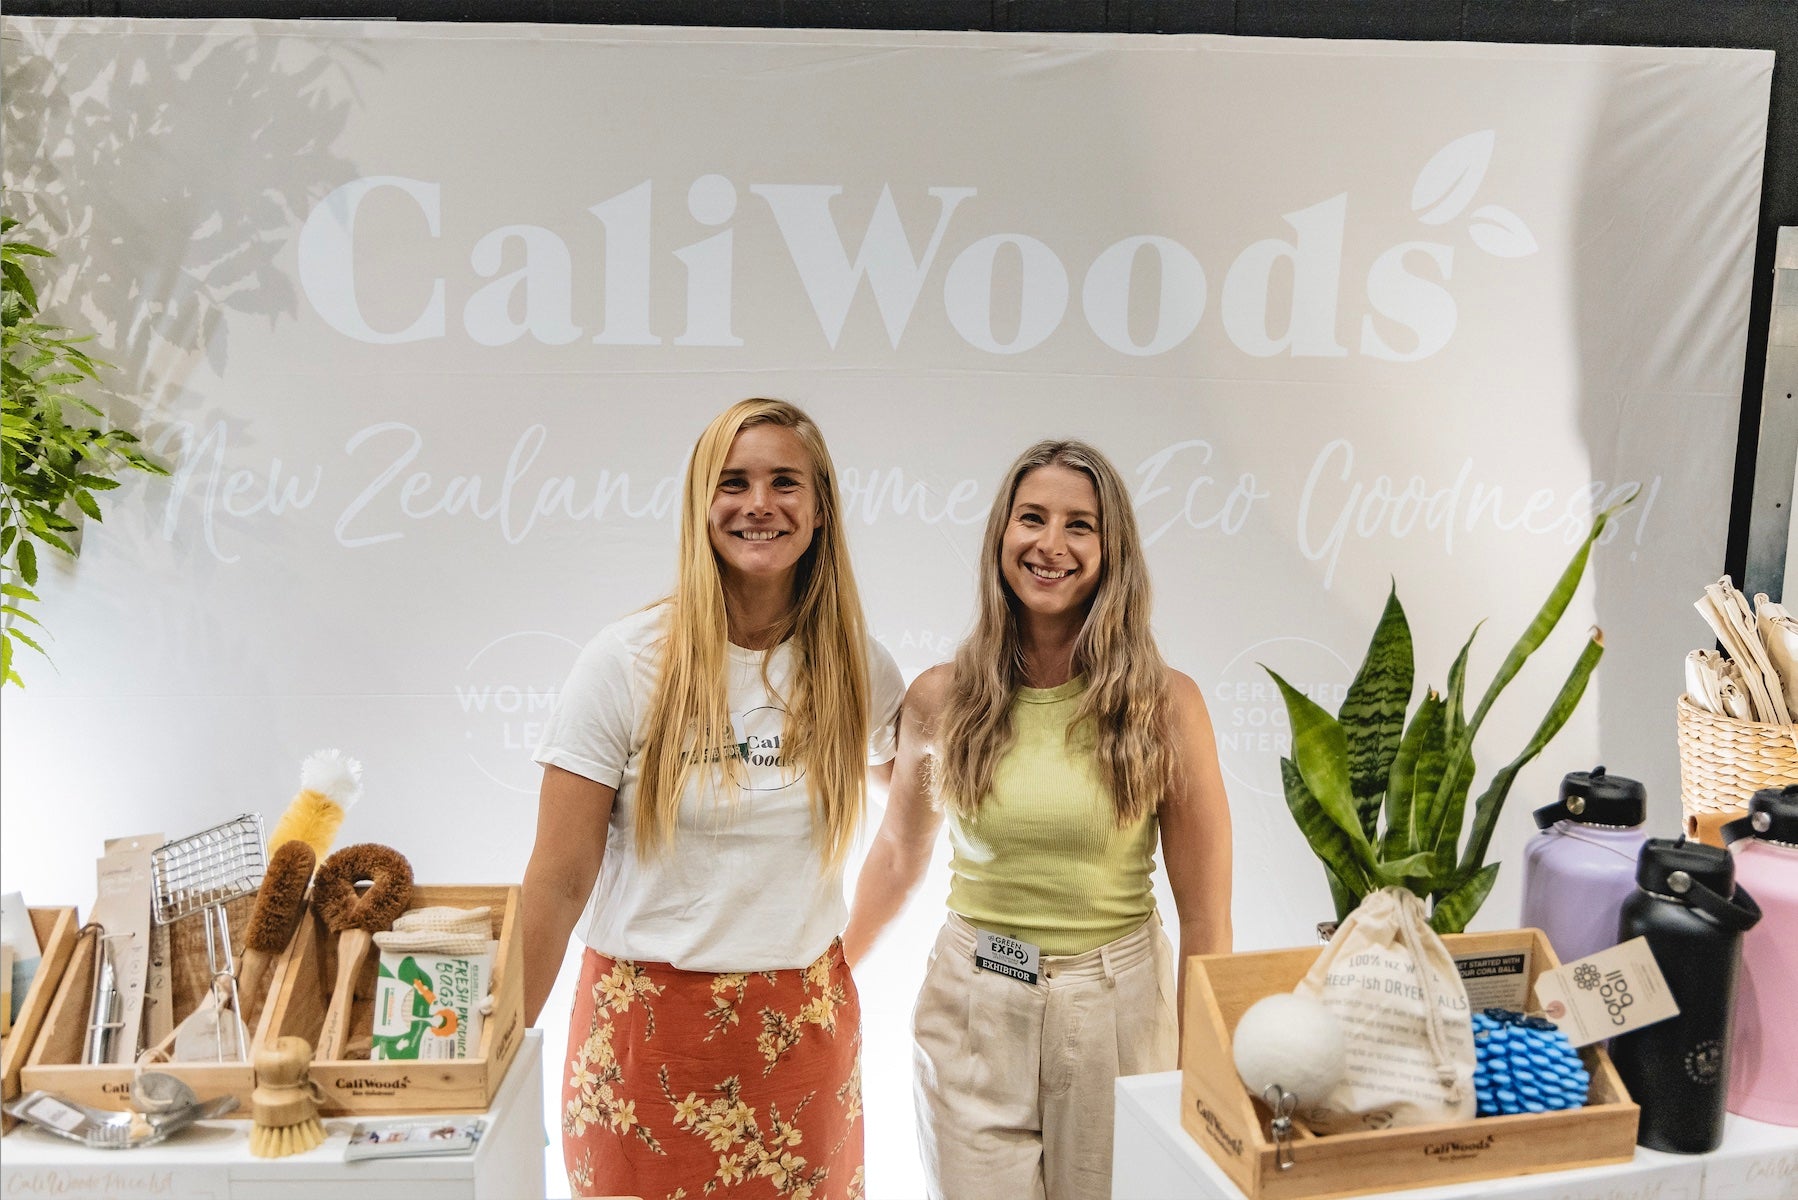 CaliWoods at Go Green Expo